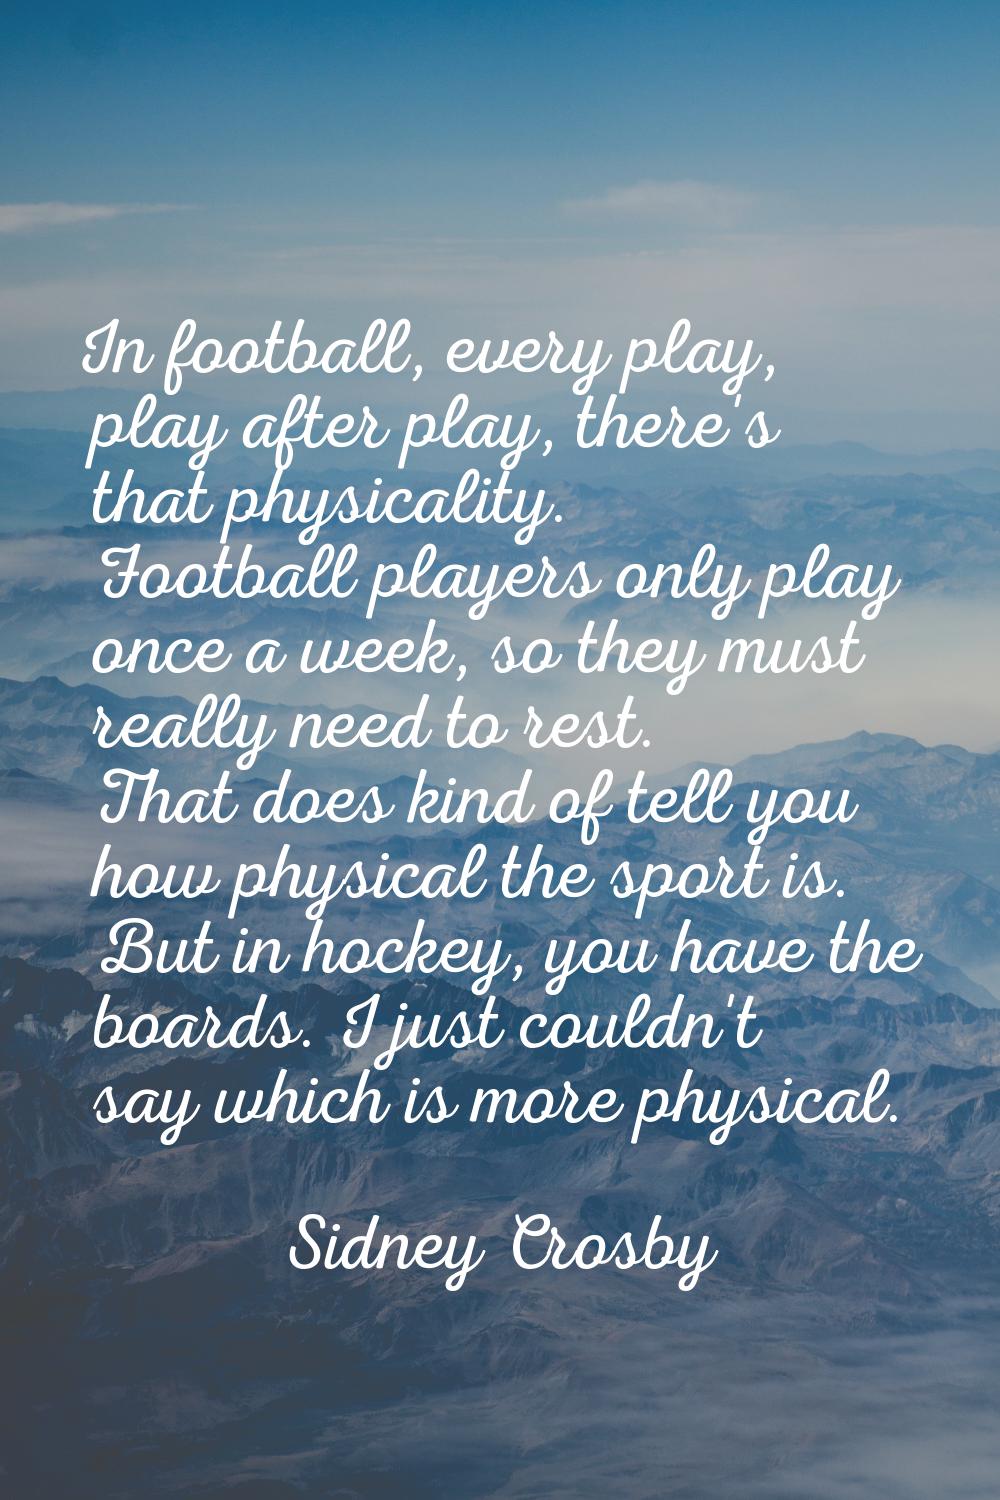 In football, every play, play after play, there's that physicality. Football players only play once